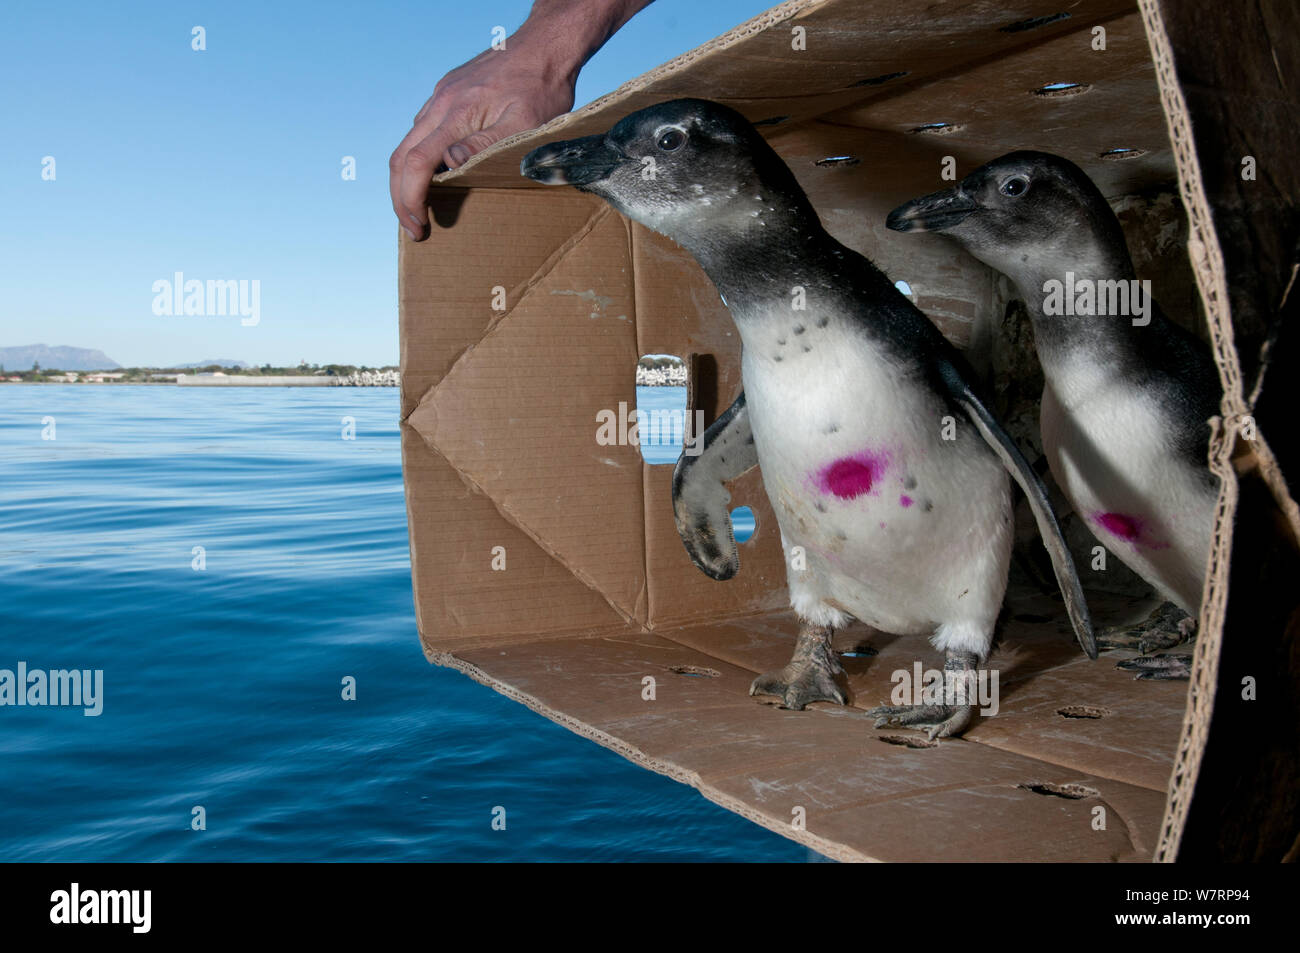 African penguins (Spheniscus demersus) being released after rehabilitation at Southern African Foundation for the Conservation of Coastal Birds (SANCCOB) near Robben Island in Table Bay. Cape Town, South Africa, July 2011 Stock Photo